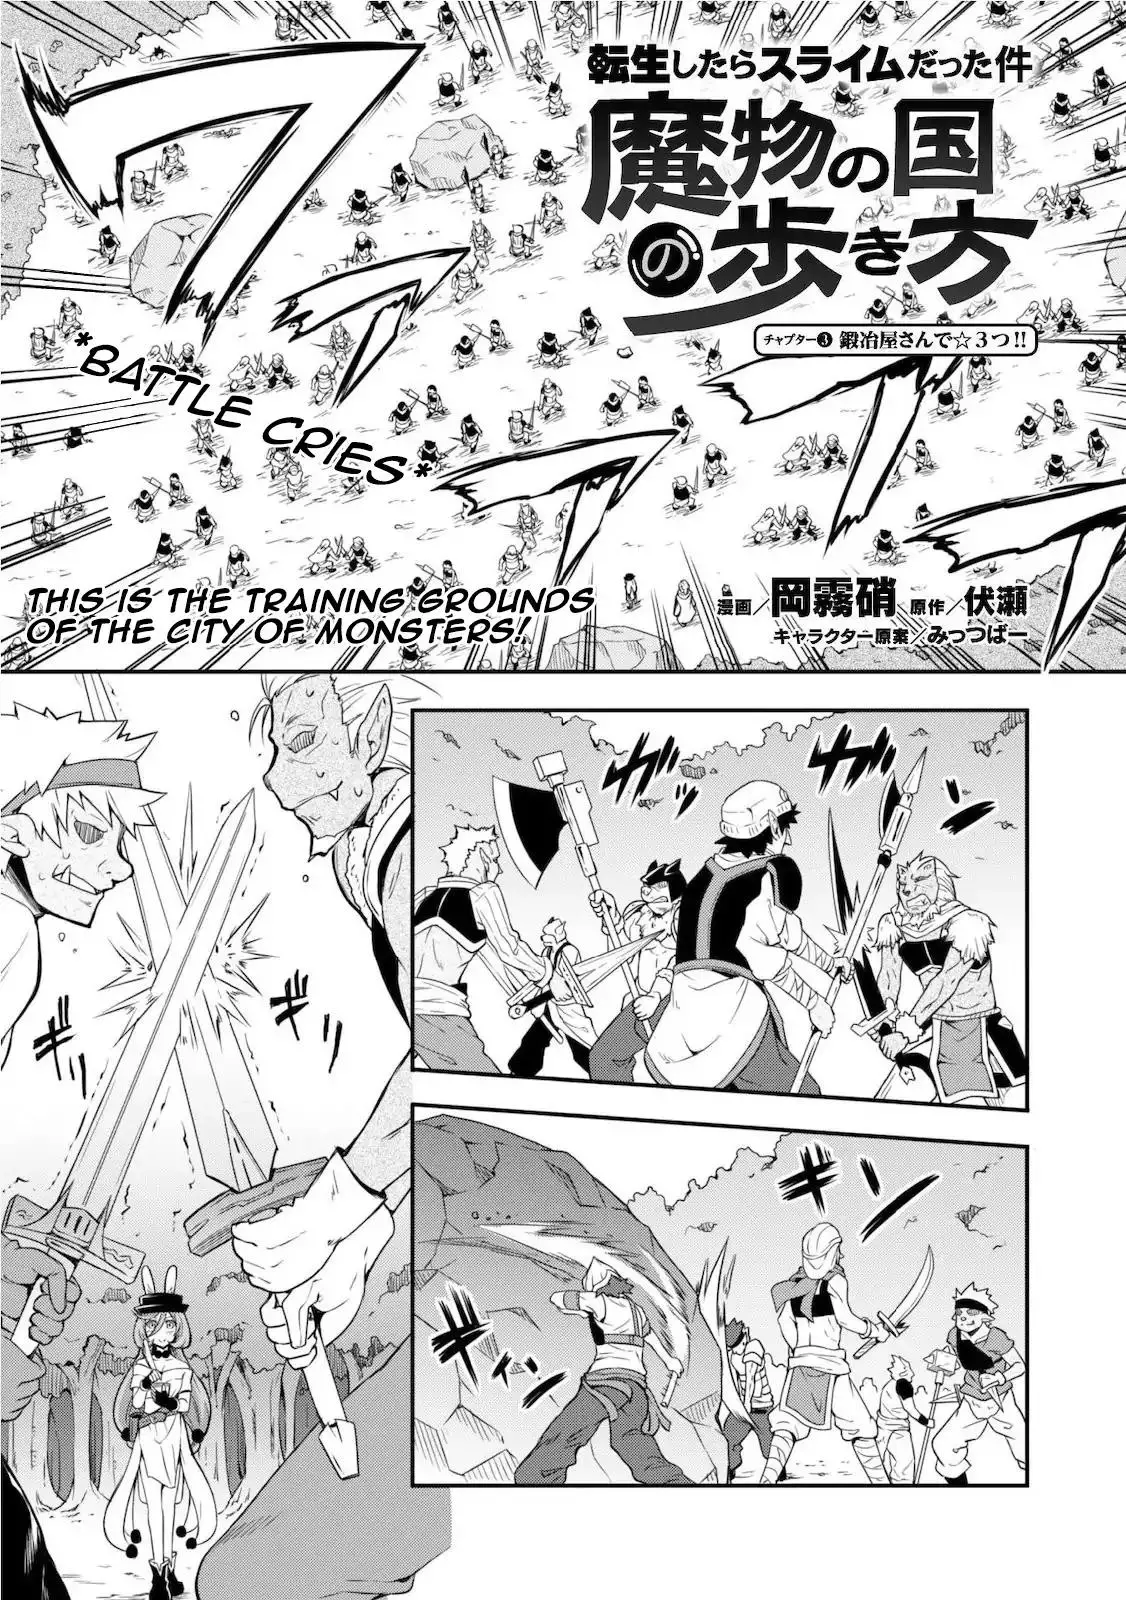 Tensei Shitara Slime Datta Ken: The Ways of Strolling in the Demon Country - 3 page 3